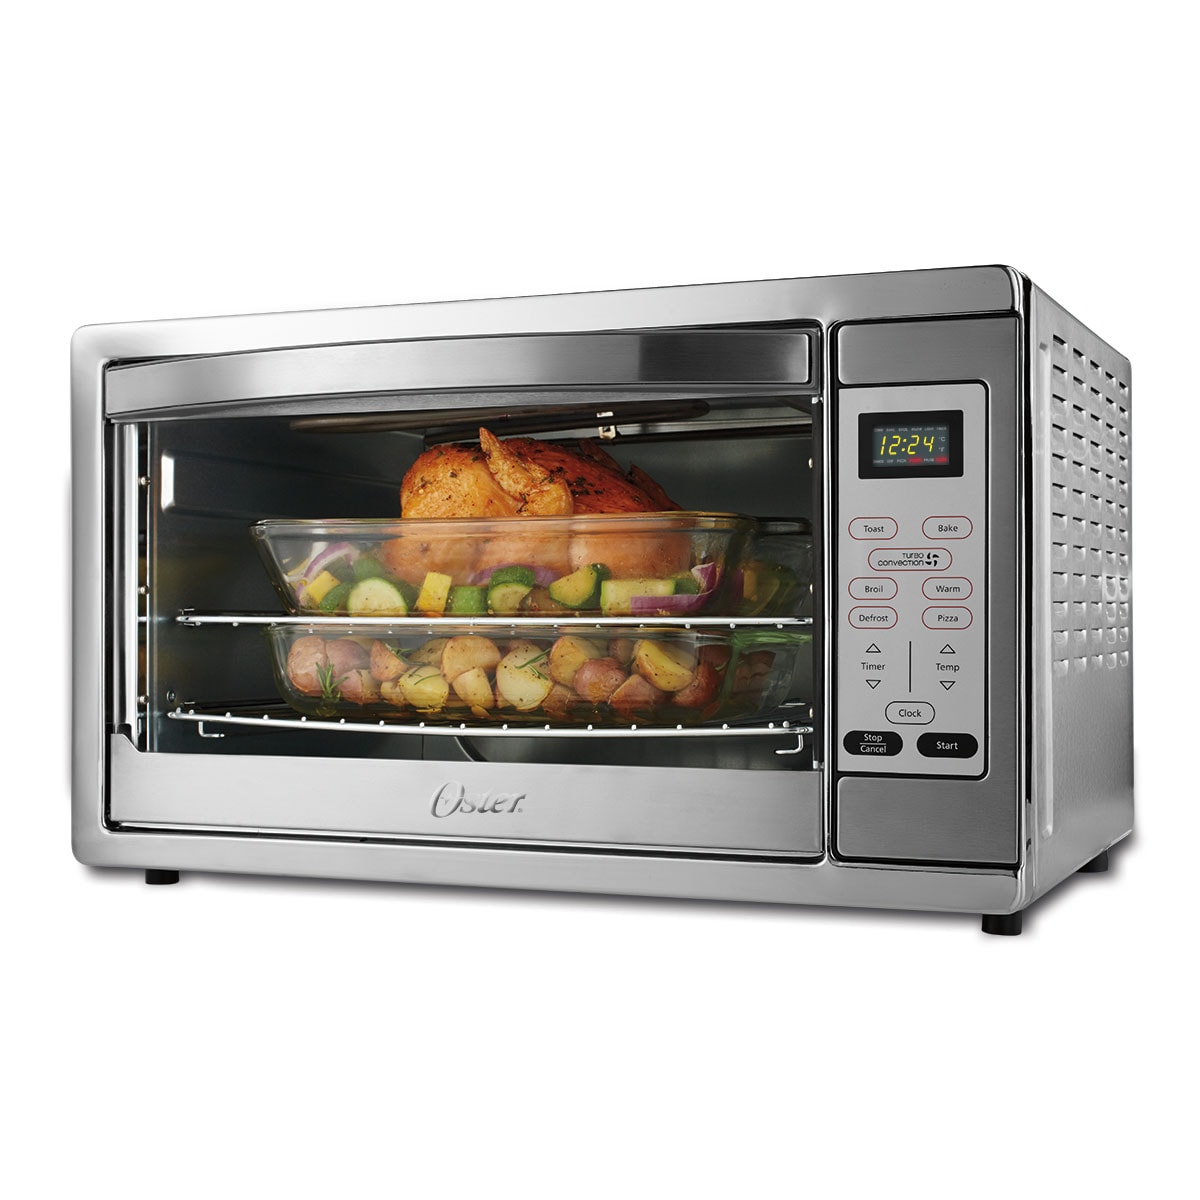 Oster Air Fryer Oven, 10-in-1 Countertop Toaster Oven, XL Fits 2 16 Pizzas, Stainless Steel French Doors